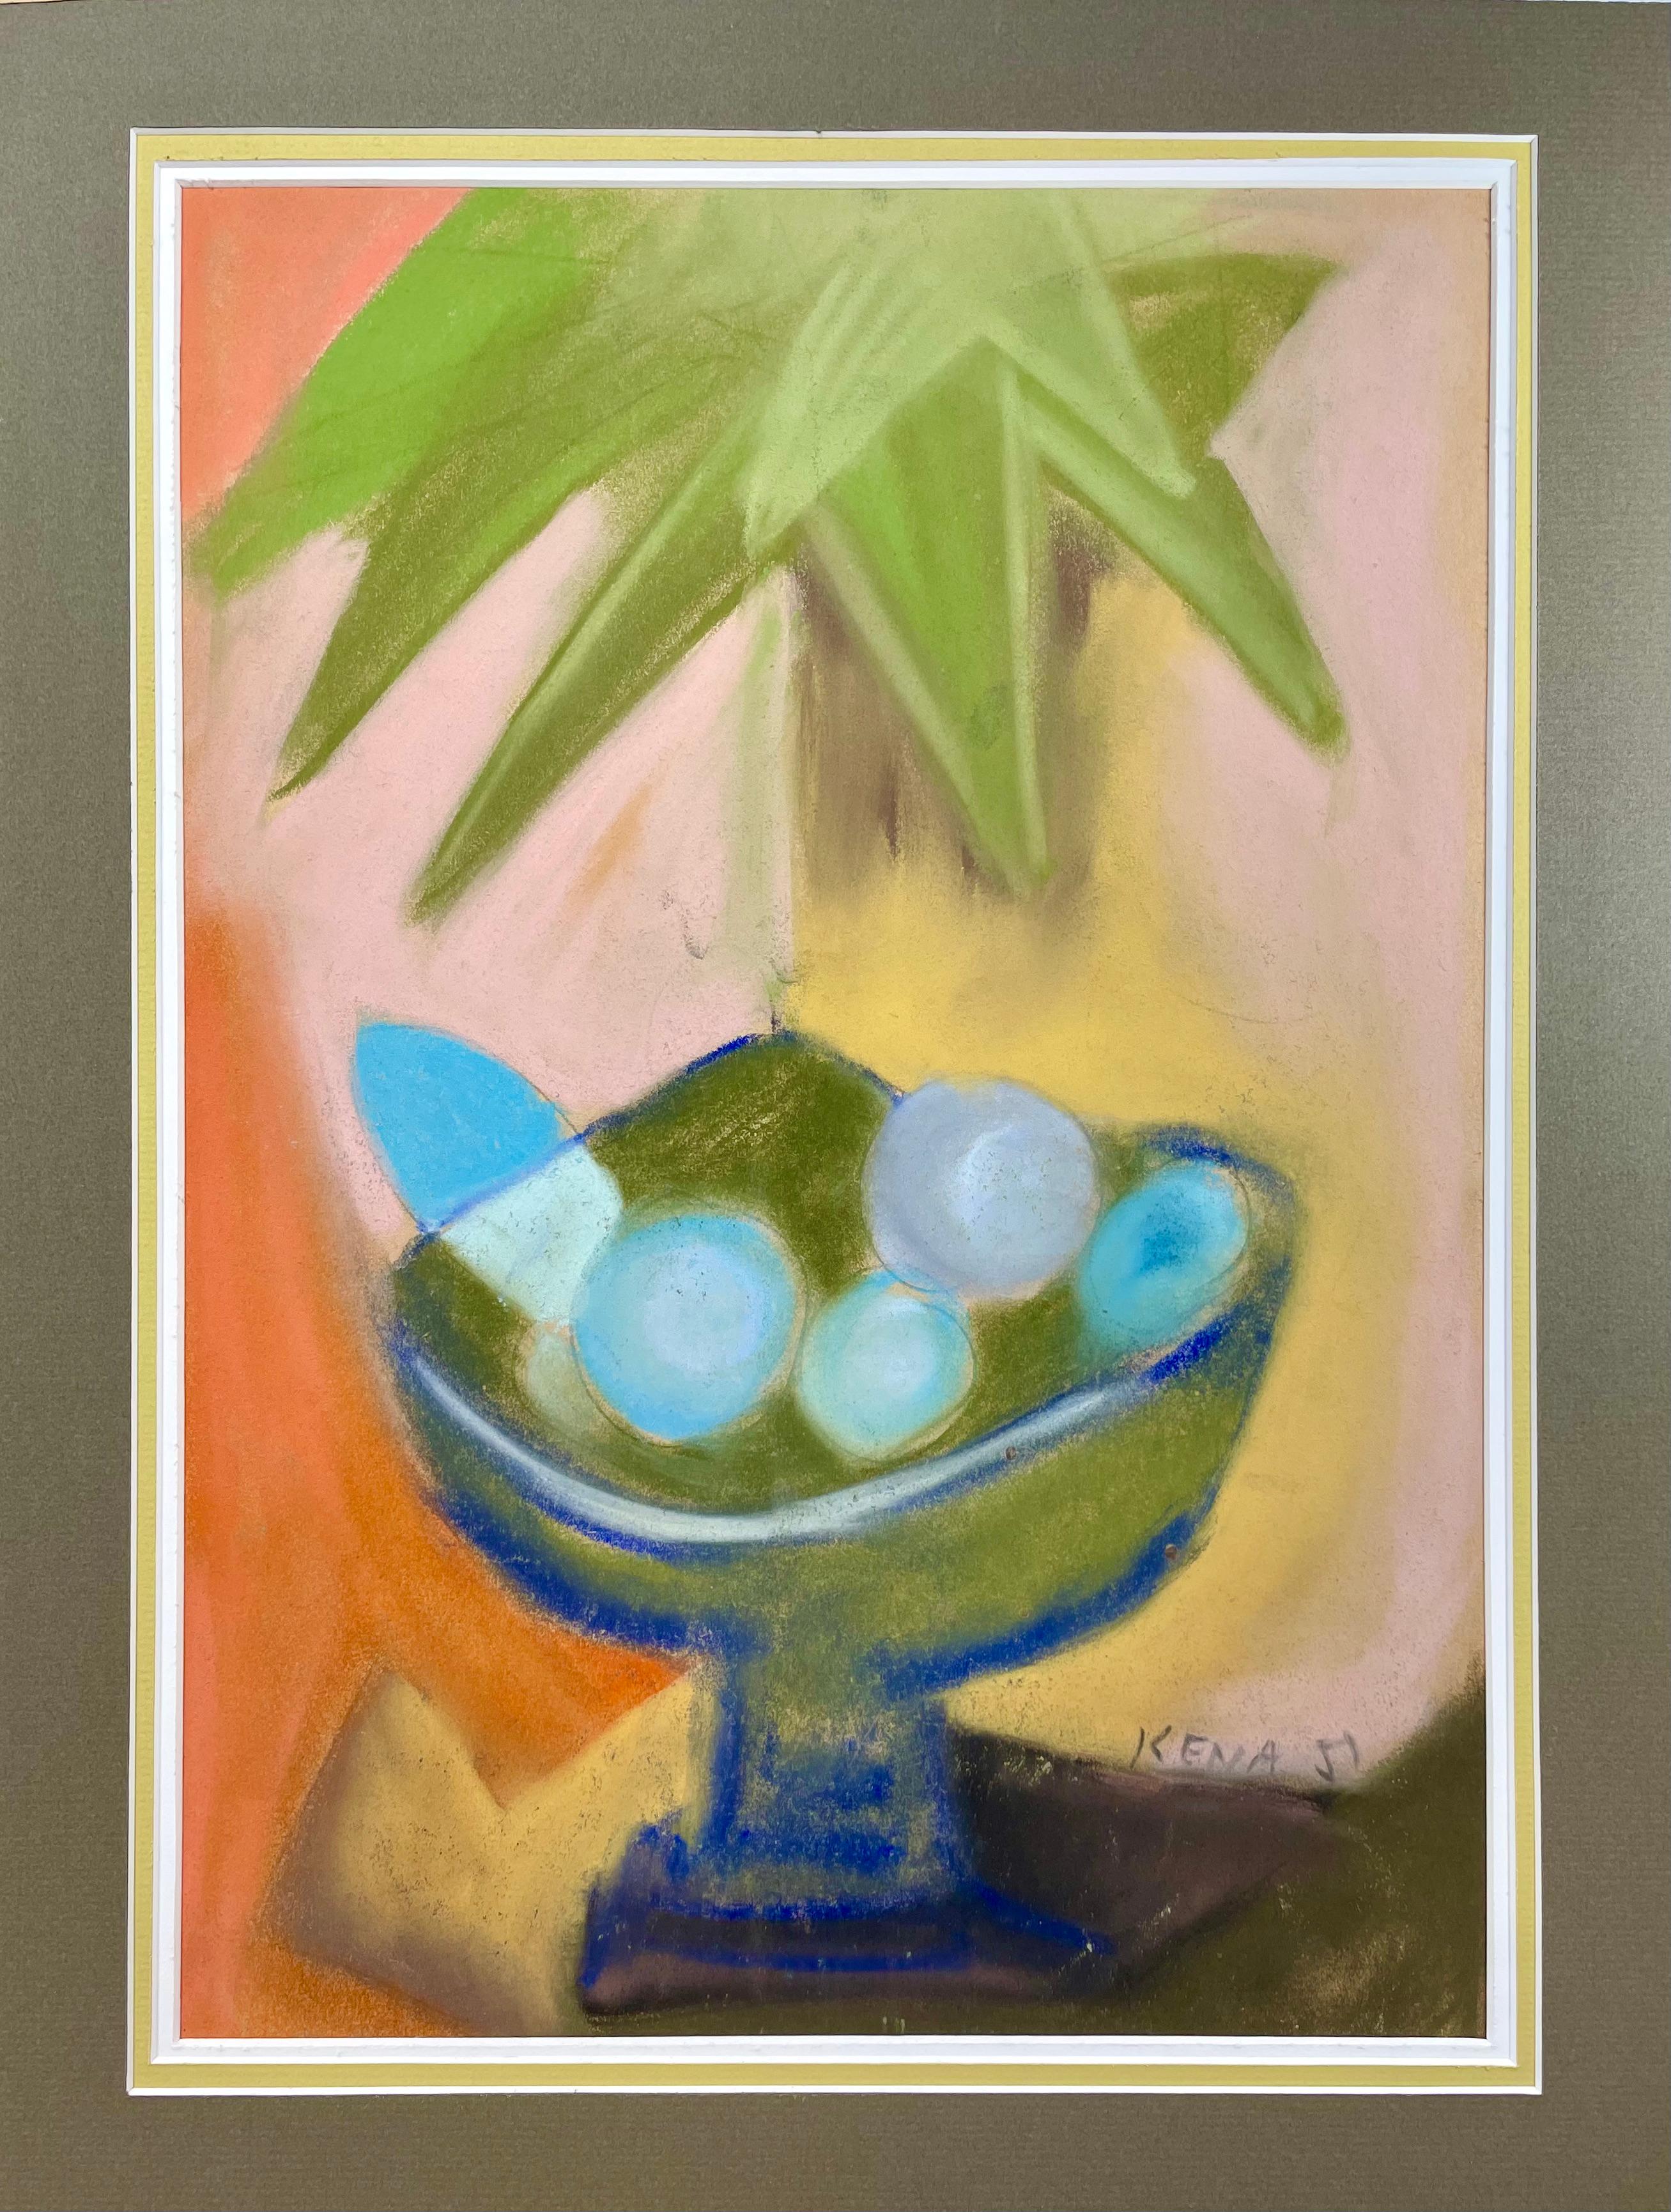 Still Life of fruits in bowl - Painting by Jaled Muyaes (Kena)